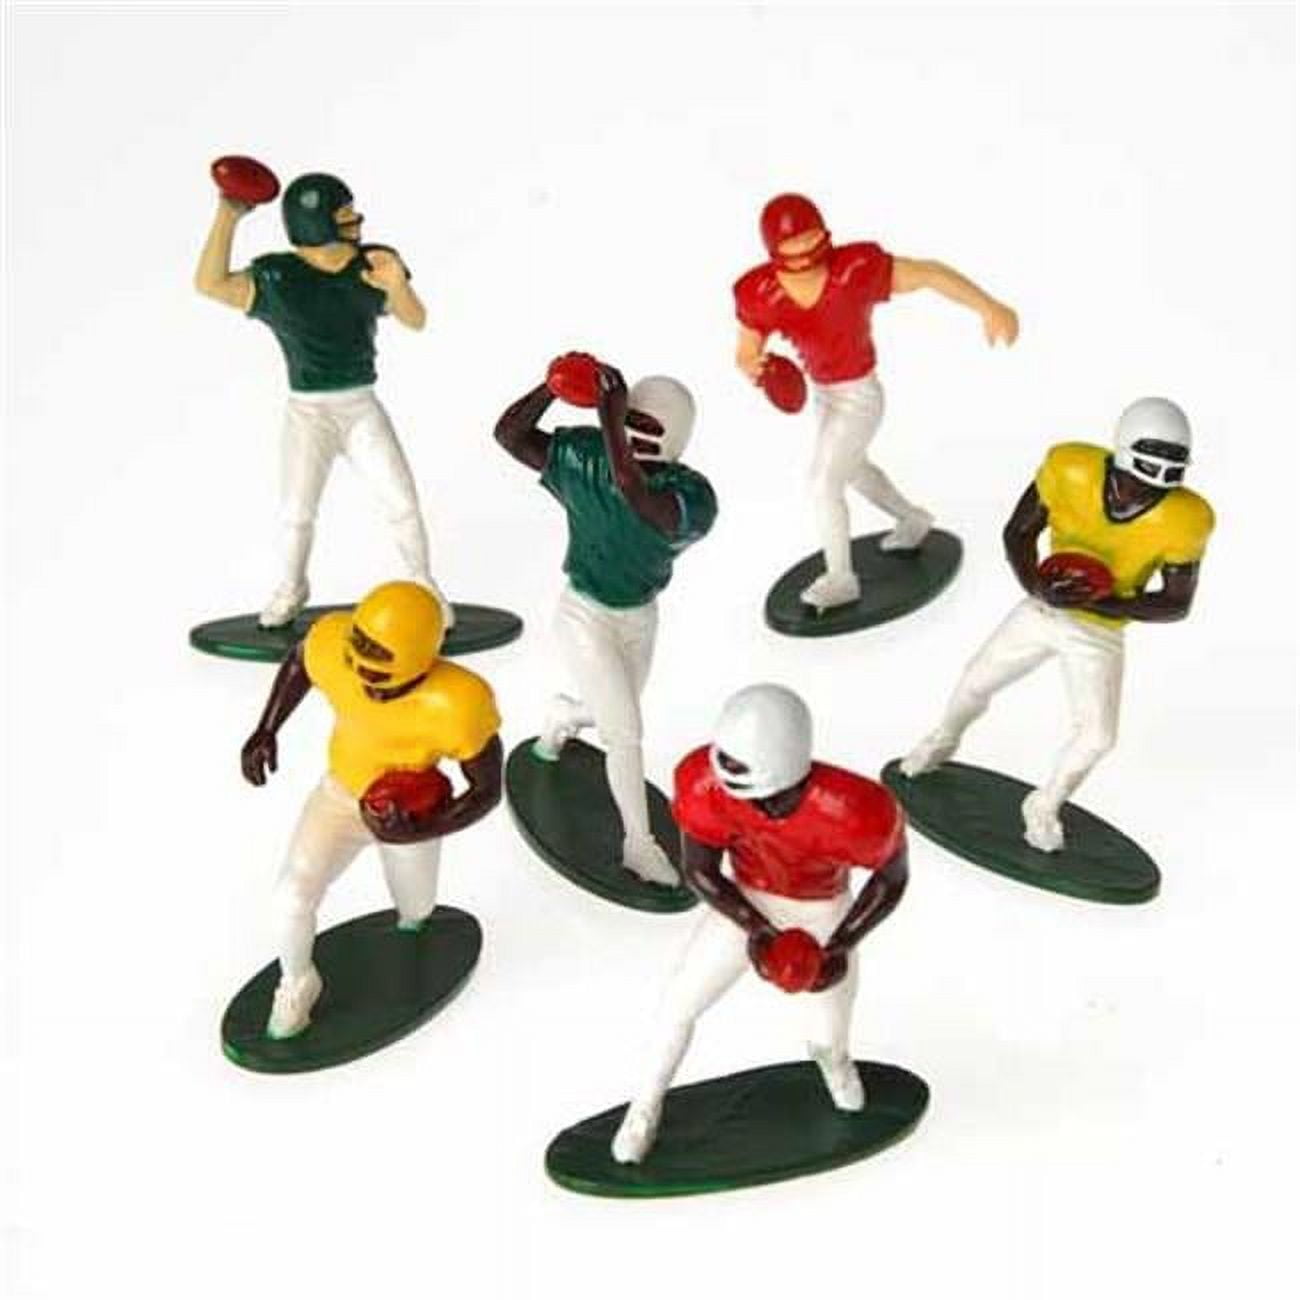 Football Figures Toy (one dozen) - Only $12.06 at Carnival Source